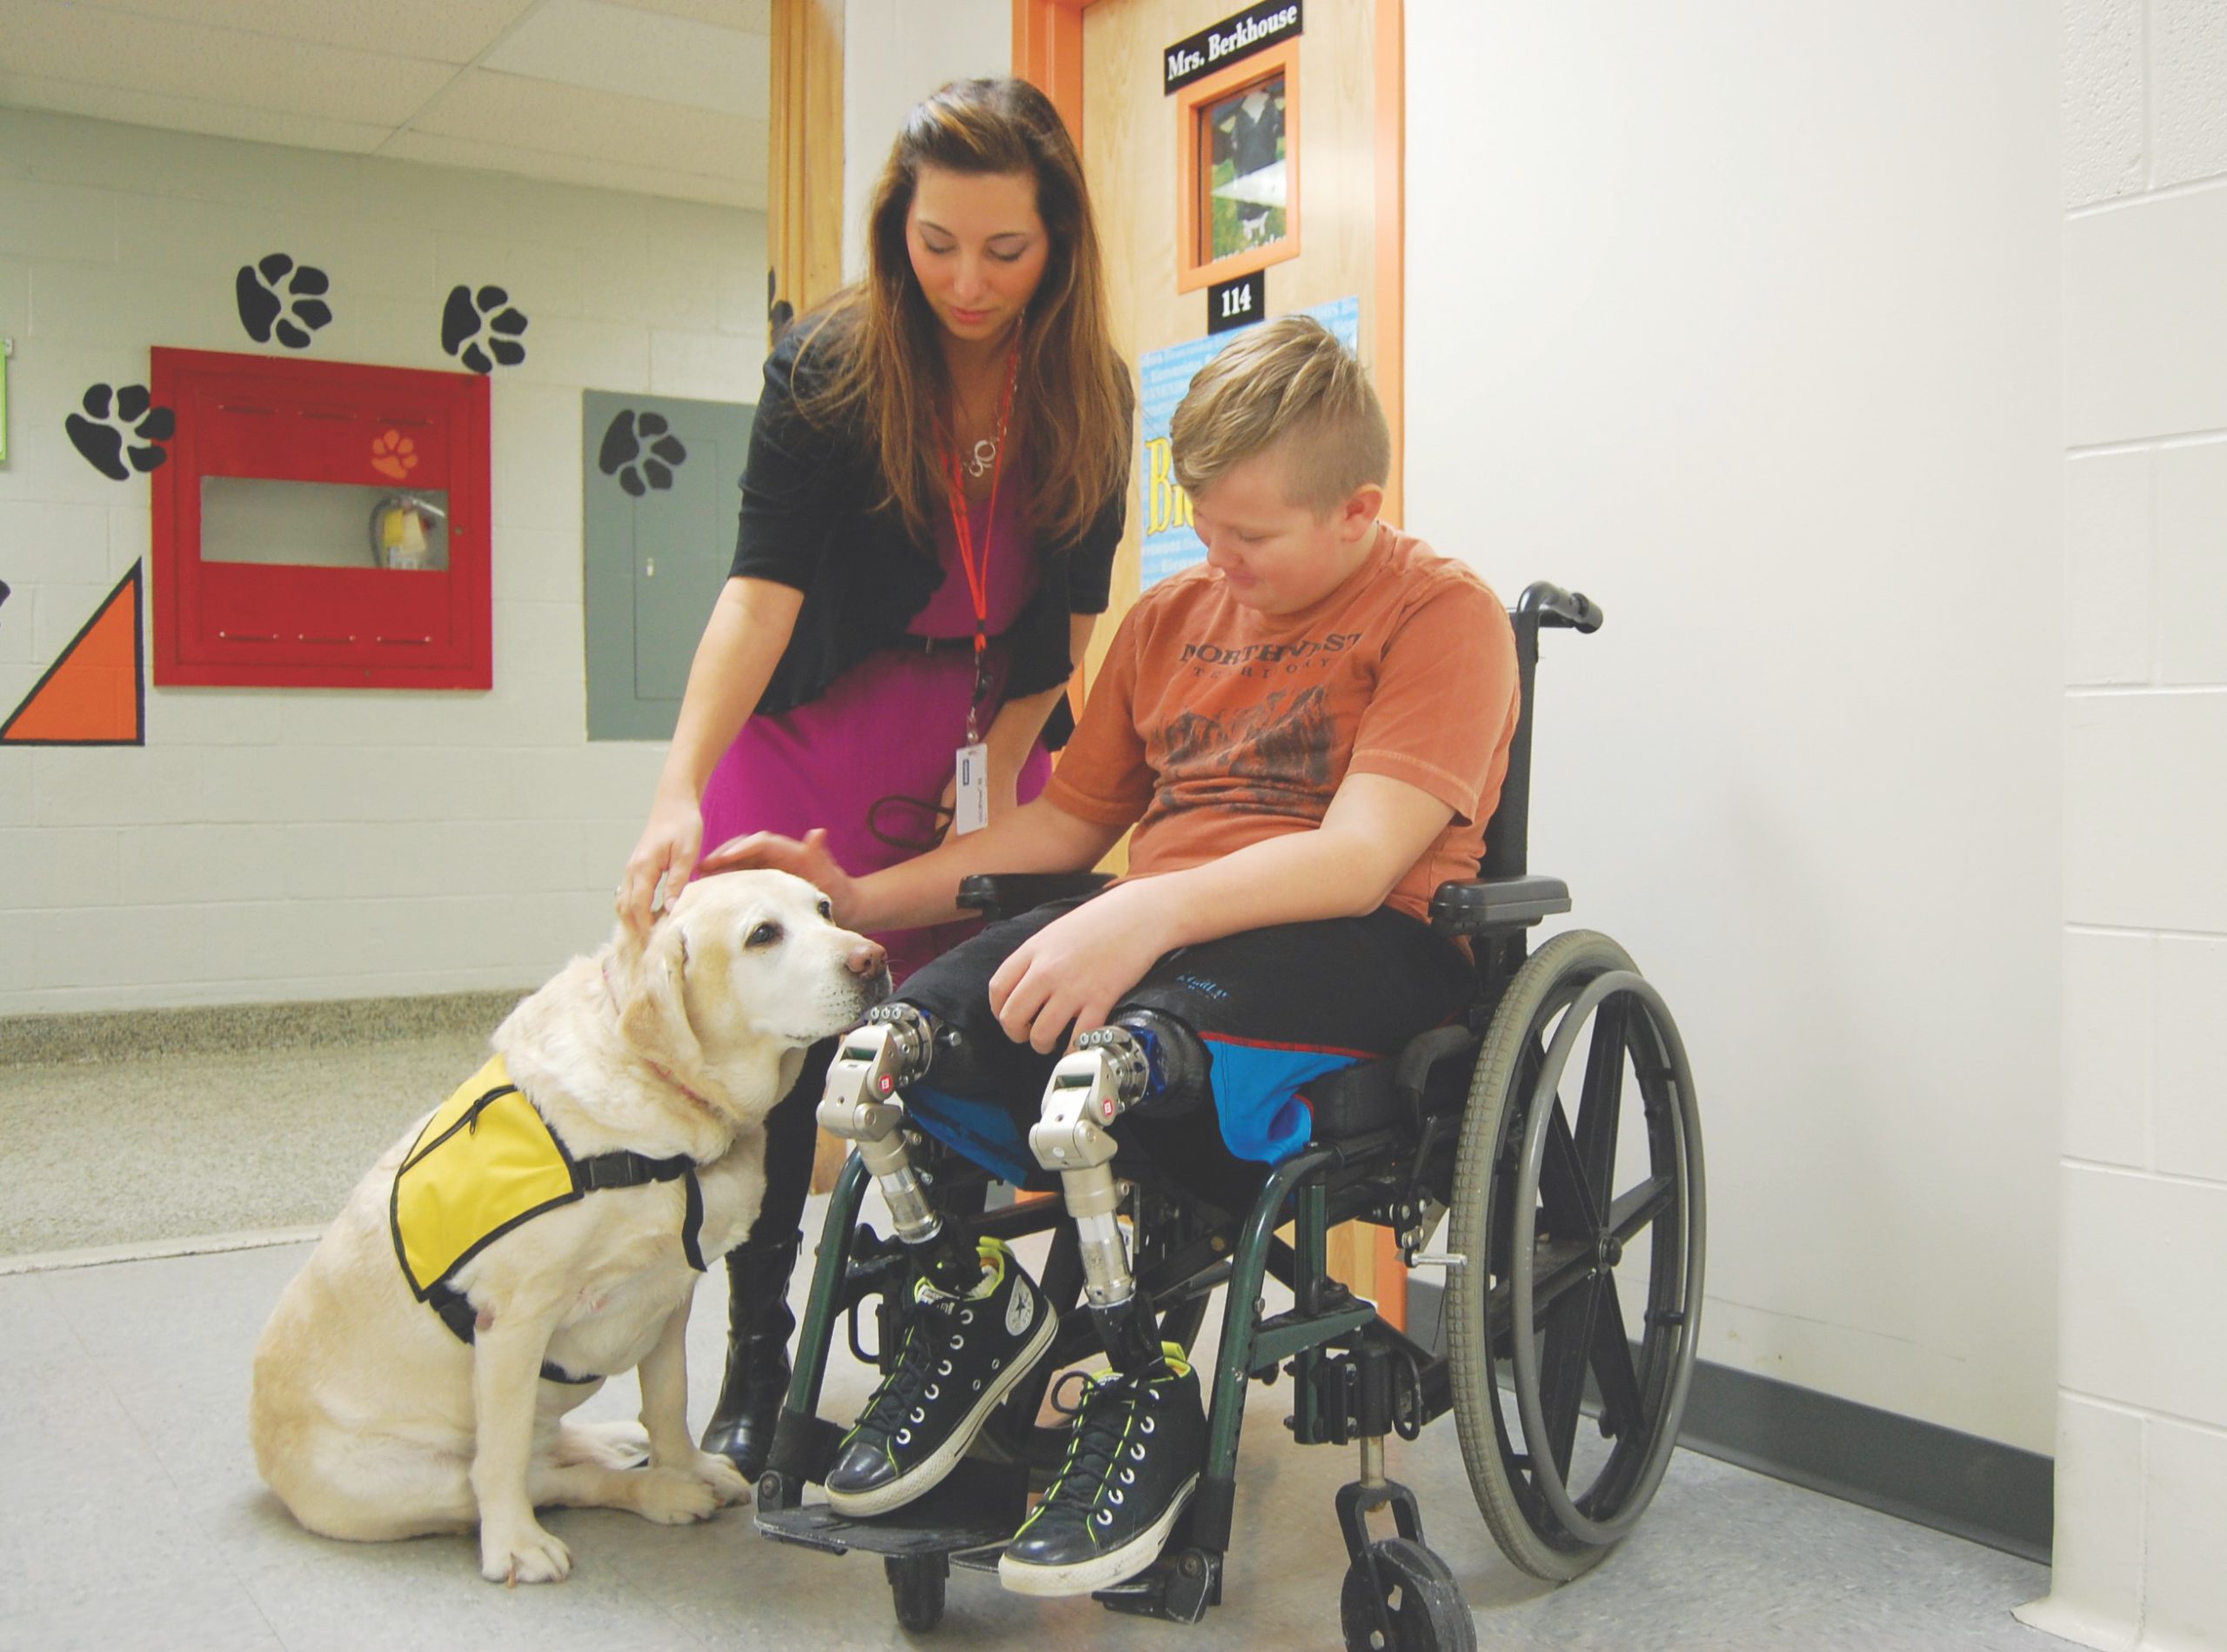 A fifth-grader who recently started using prosthetic legs visits with Bella at Green Intermediate School in Ohio. Her presence promotes feelings of safety among students, says her owner.